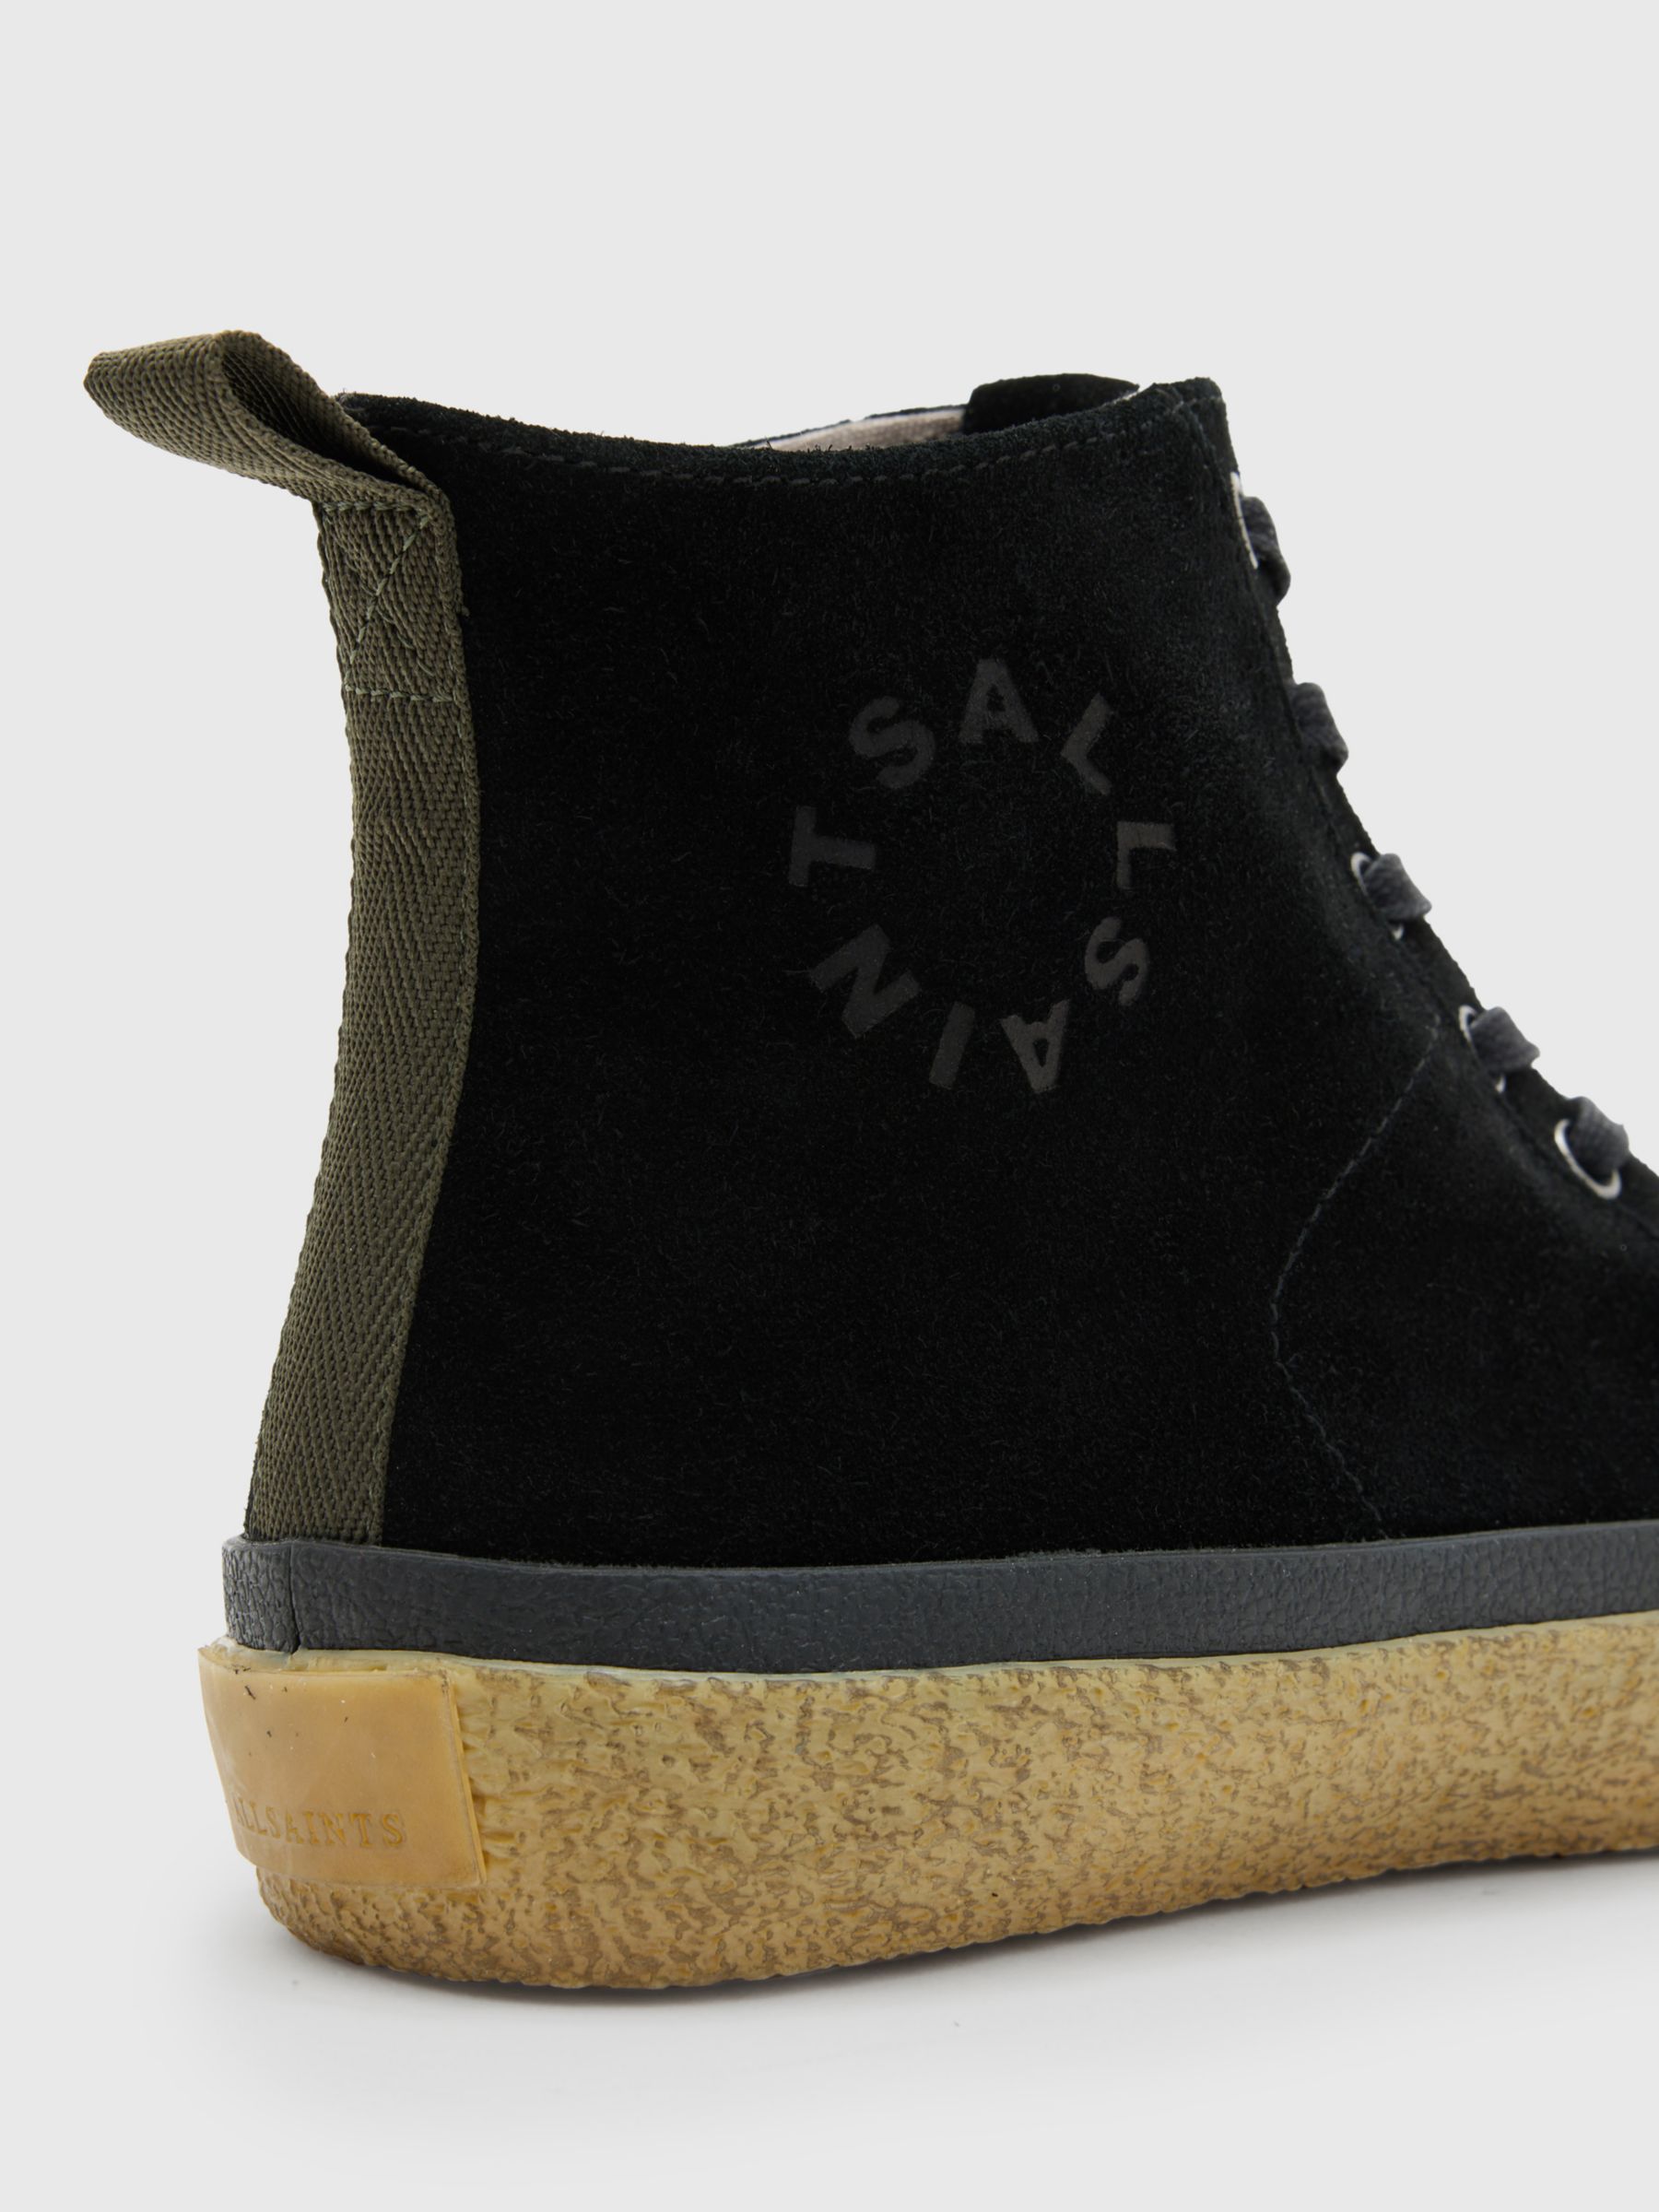 Buy AllSaints Crister High Top Trainers, Black Online at johnlewis.com